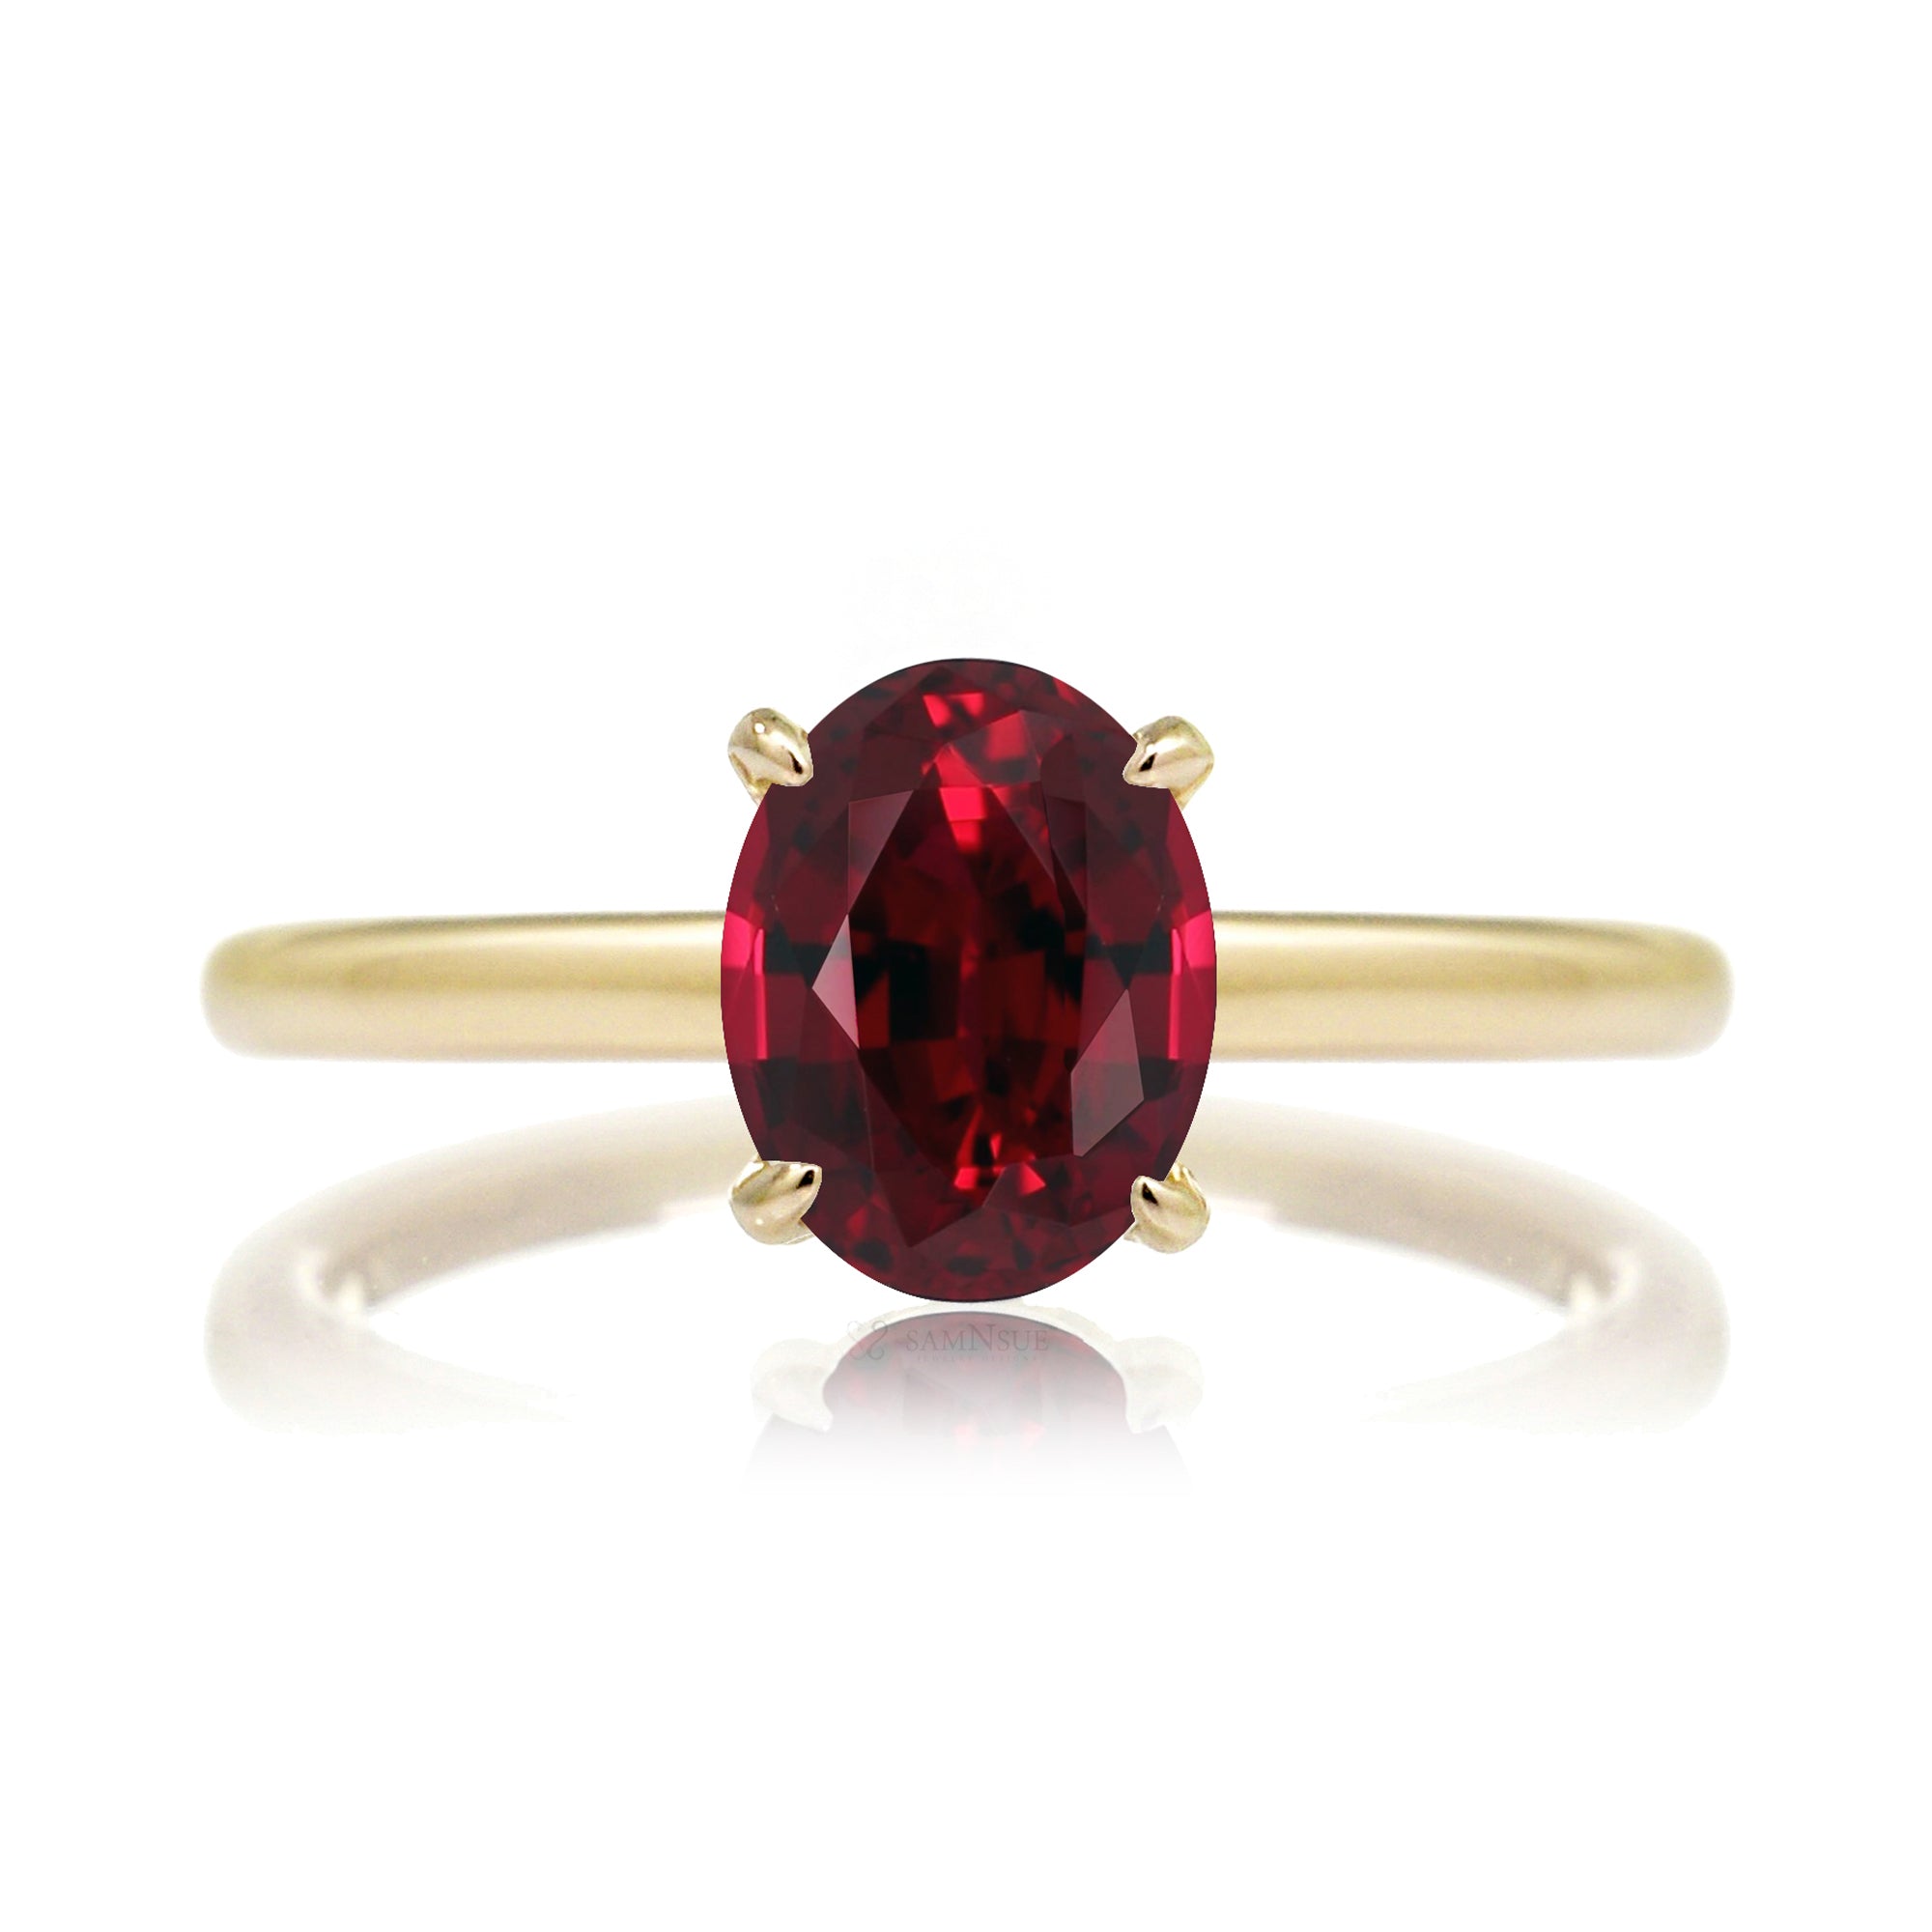 11.01 ct oval ruby ring - GIA 4Cs